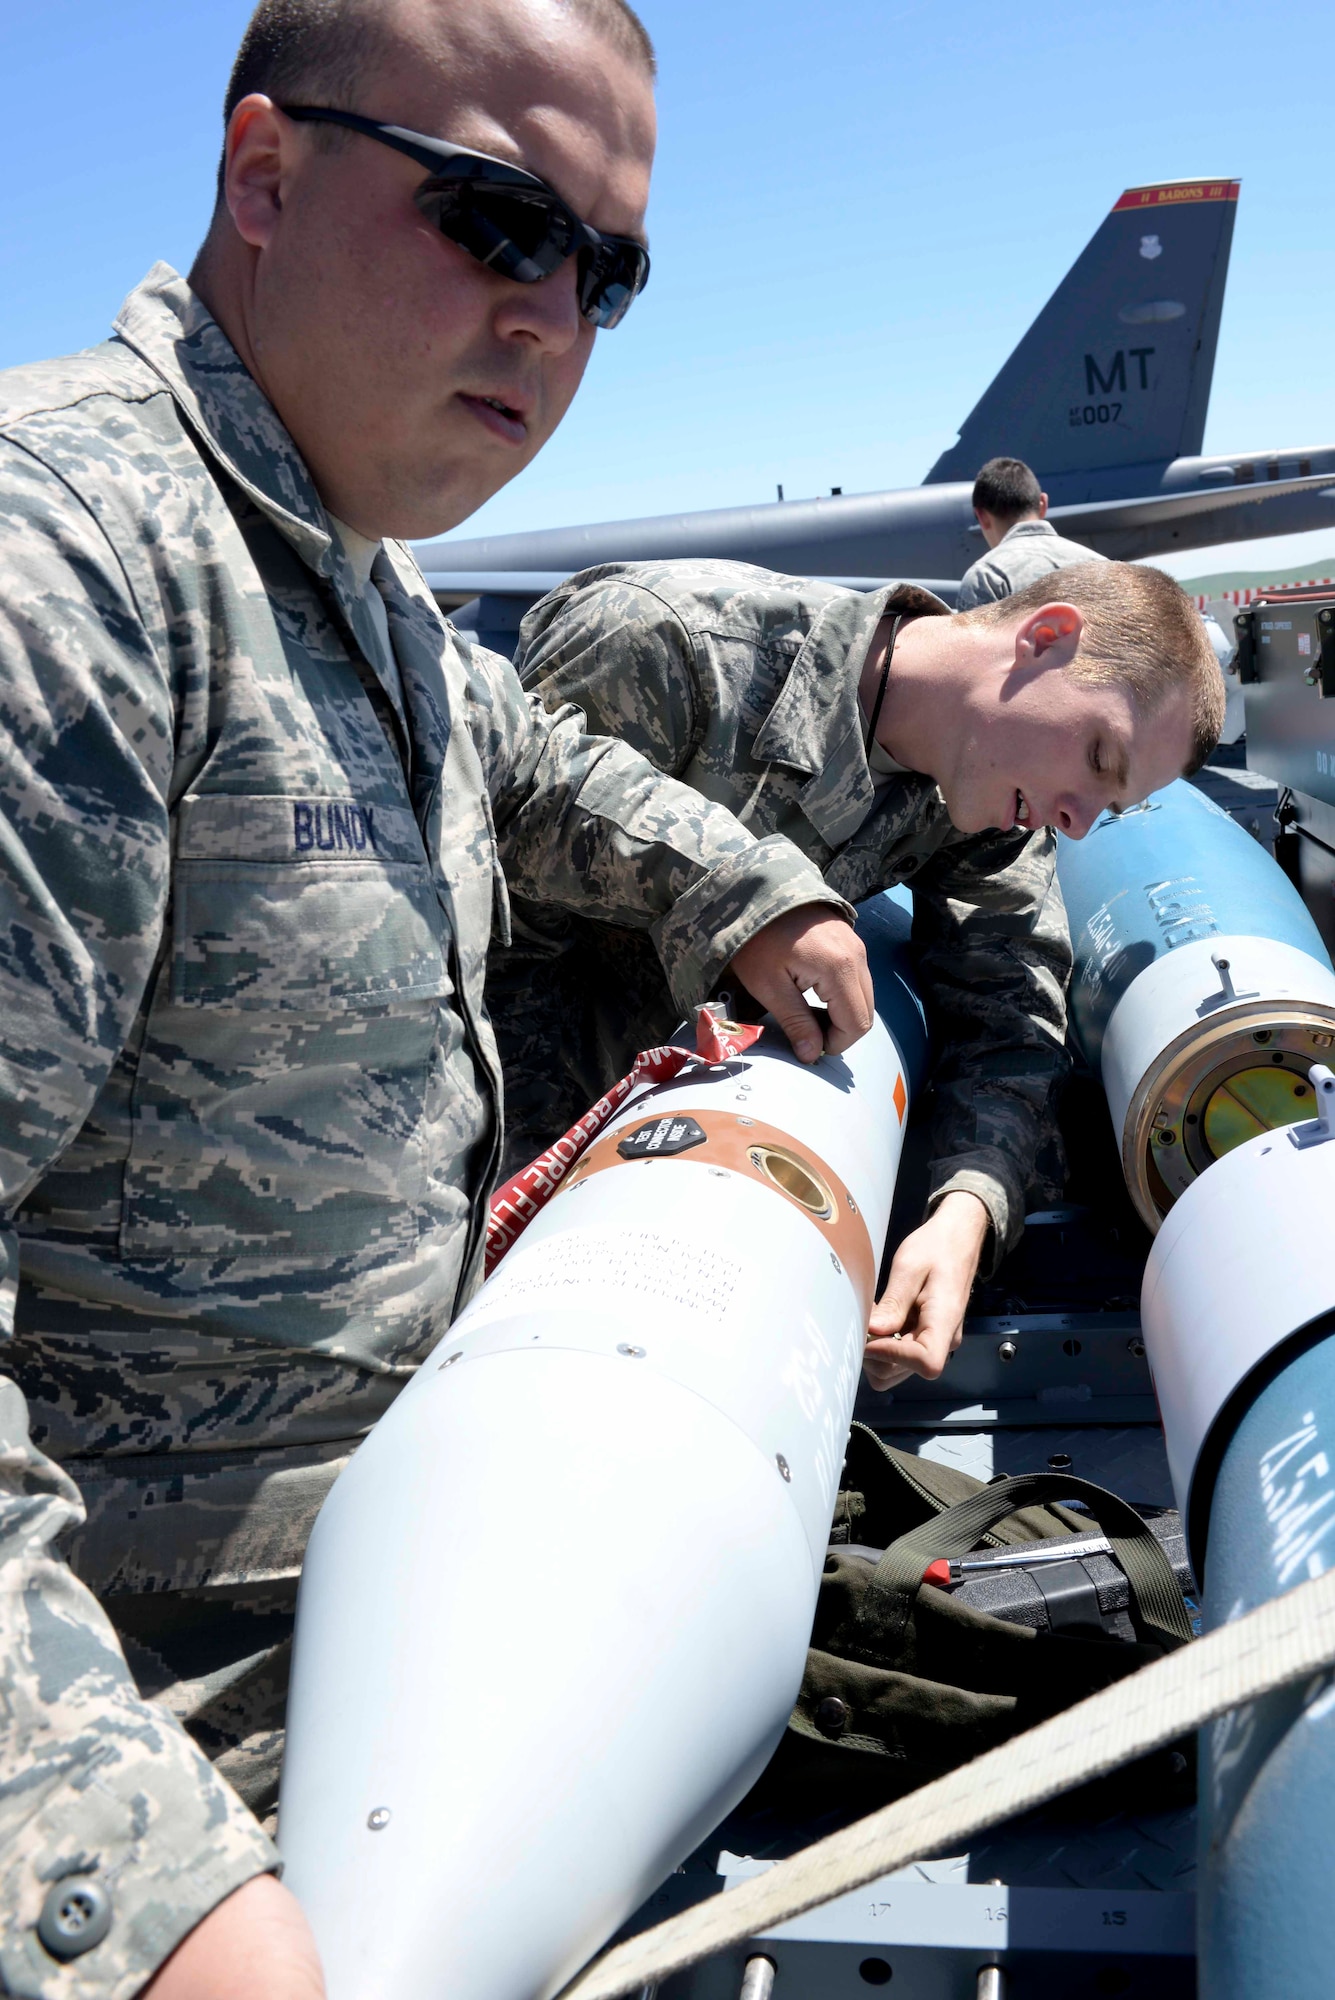 Staff Sgt. Brody Bundy and Airman Michael Page, 5th Aircraft Maintenance Squadron weapons load crew members,  prepare an inert Joint Direct Attack Munition GBU-12 to be loaded onto a B-52 Stratofortress at Ellsworth Air Force Base, S.D., June 9, 2014. For two weeks, four weapons load crew teams from Minot Air Force Base, N.D., loaded inert bombs onto several B-52s for employment during close air support training missions with U.S. Army Joint Terminal Attack Controllers. (U.S. Air Force photo by Senior Airman Anania Tekurio/Released)